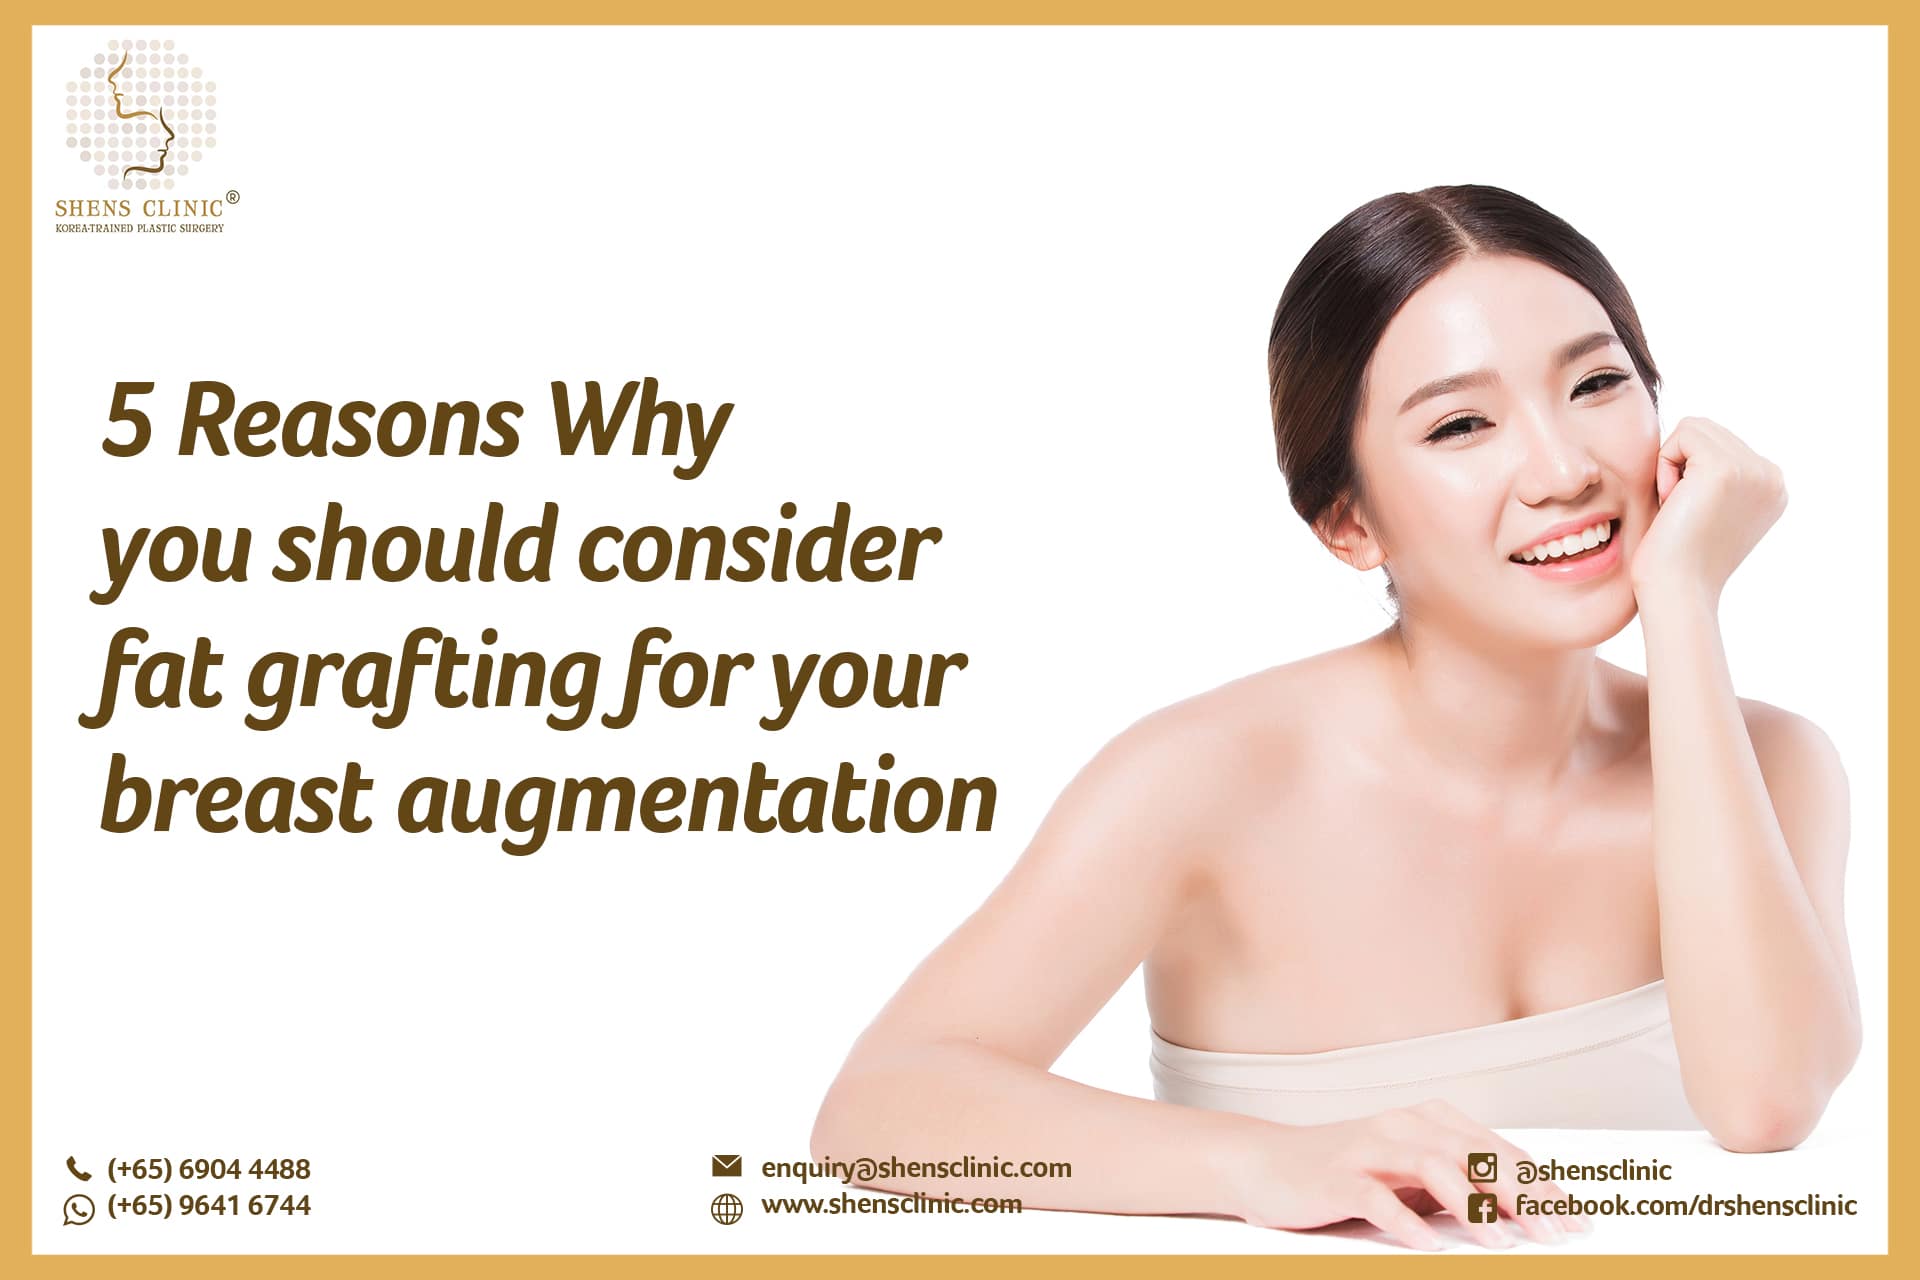 5 Reasons Why You Should Consider Fat Grafting for your Breast Augmentation